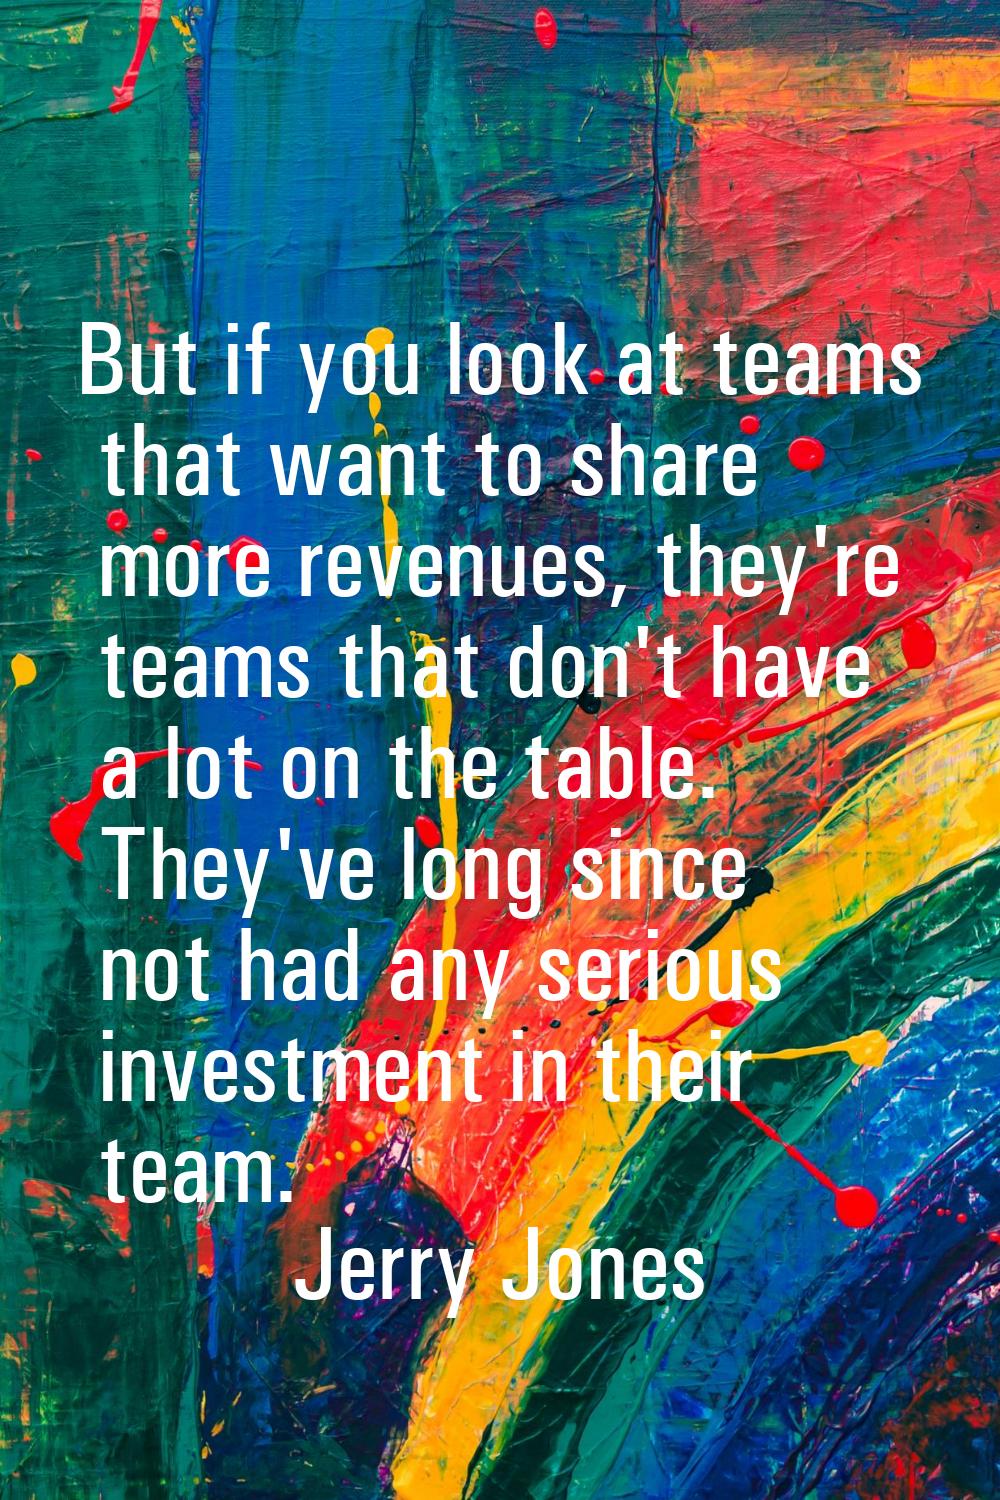 But if you look at teams that want to share more revenues, they're teams that don't have a lot on t